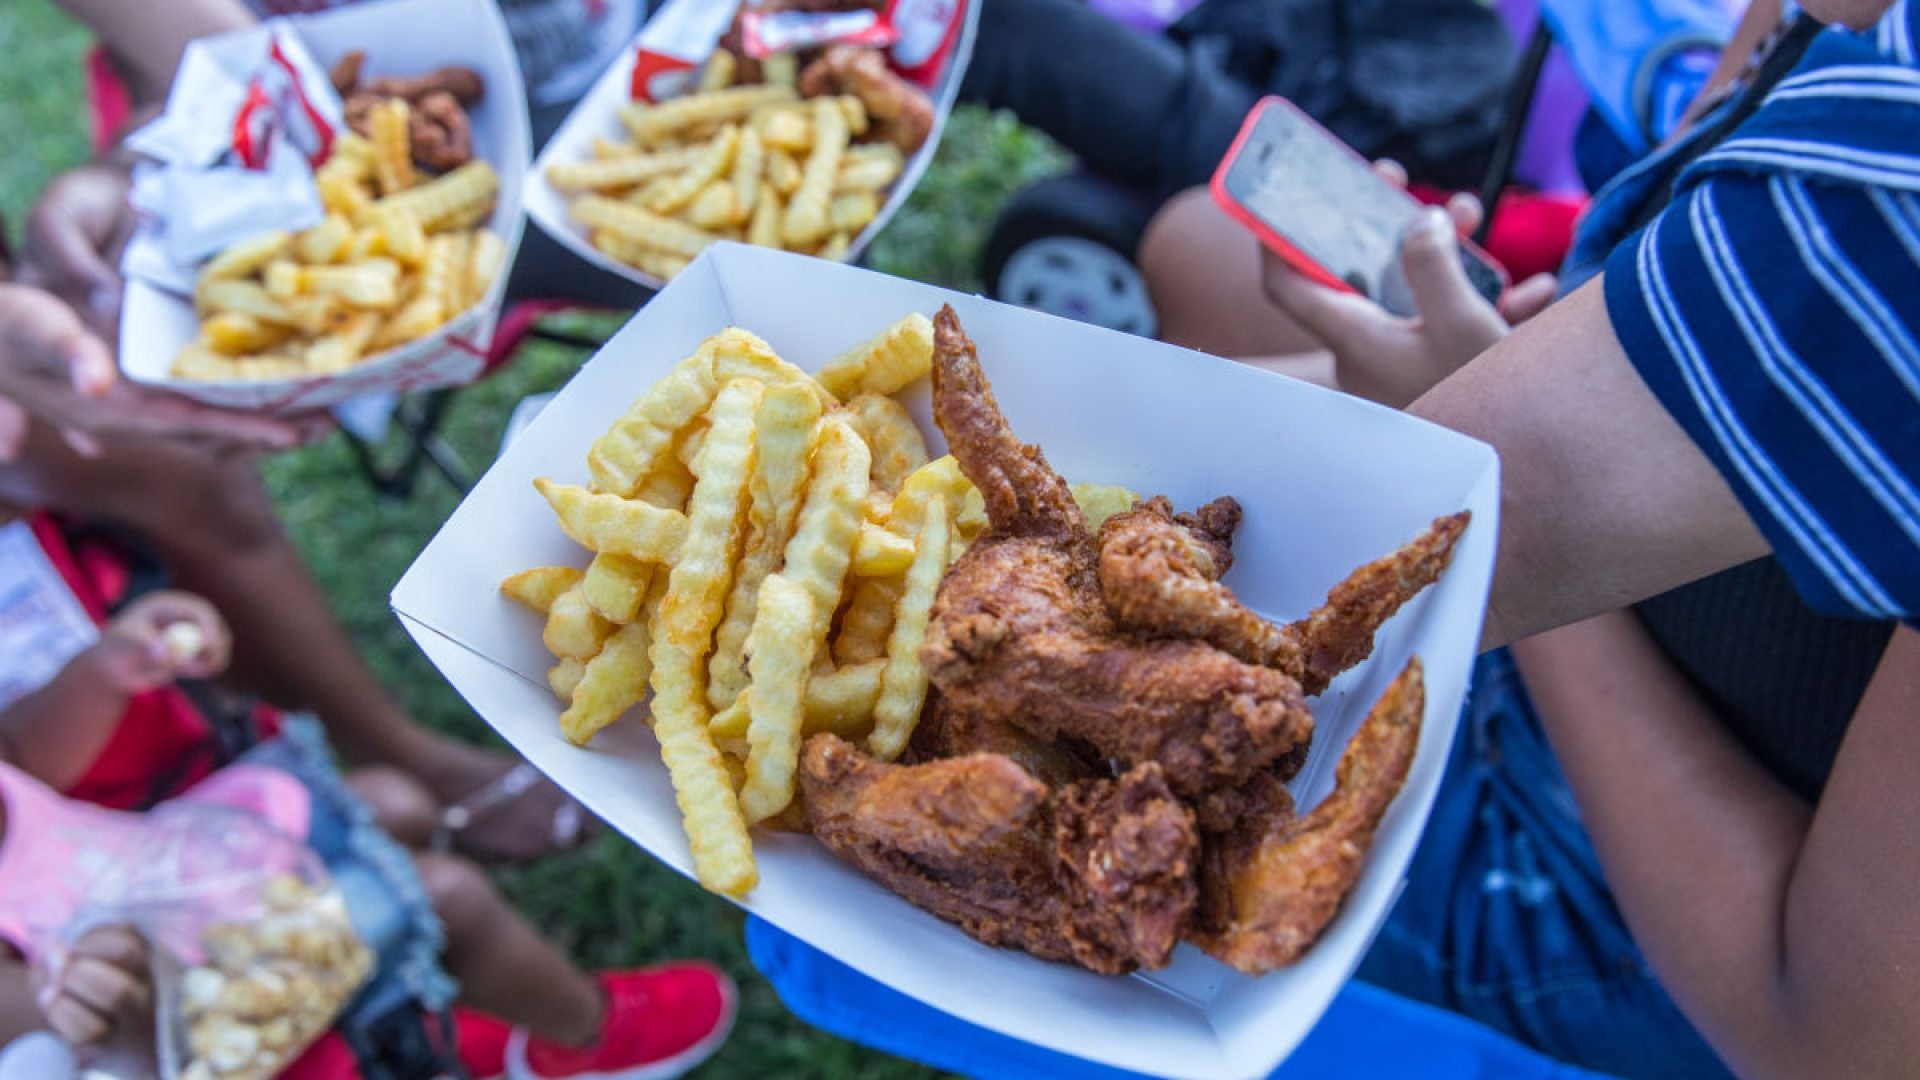 Black-Owned Fried Chicken Festival Returns To NOLA After Two-Year Hiatus Due To Pandemic